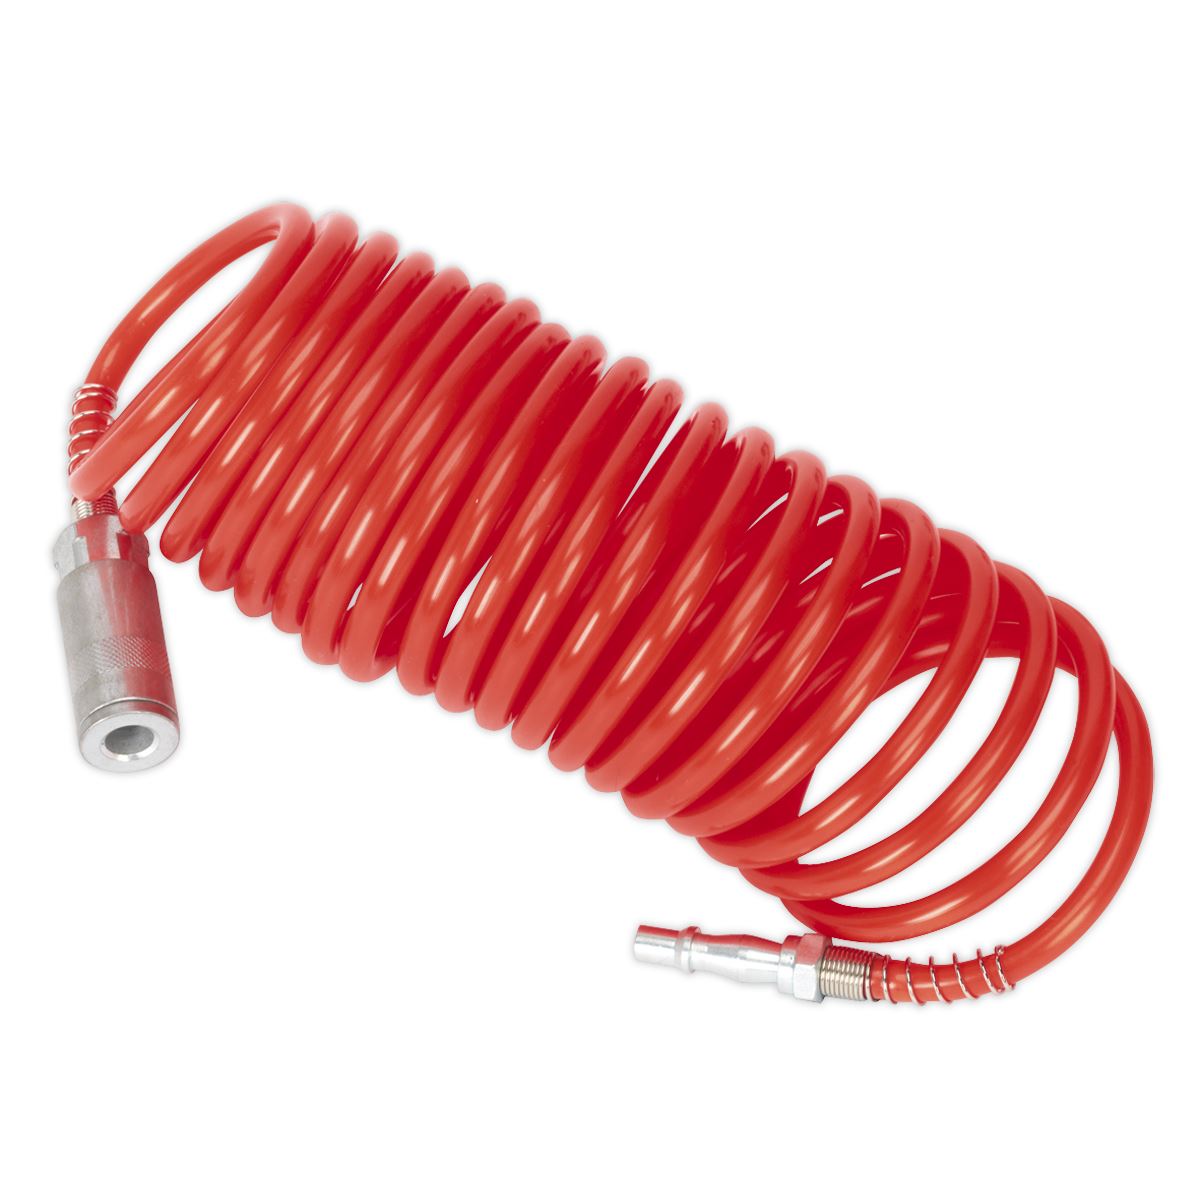 Sealey 5m Coiled Air Hose Quick Release 5mm Diameter Fittings Couplings